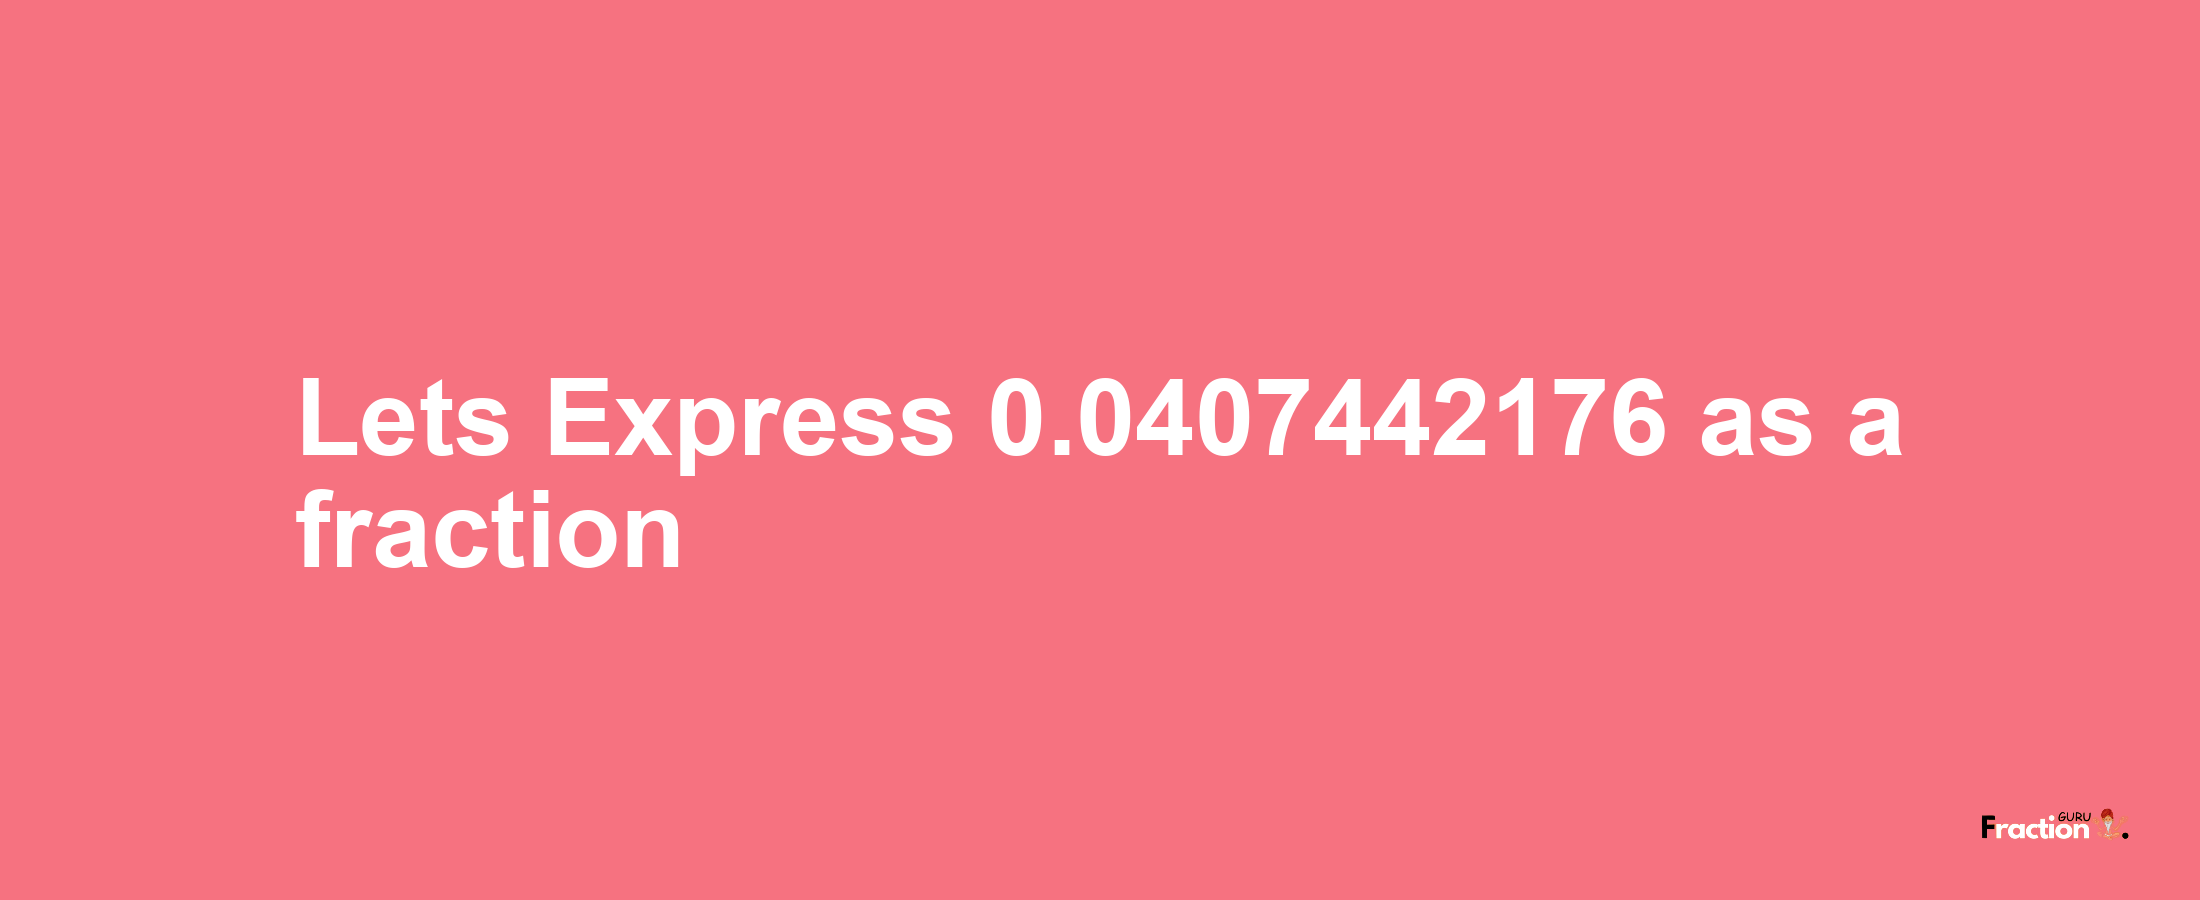 Lets Express 0.0407442176 as afraction